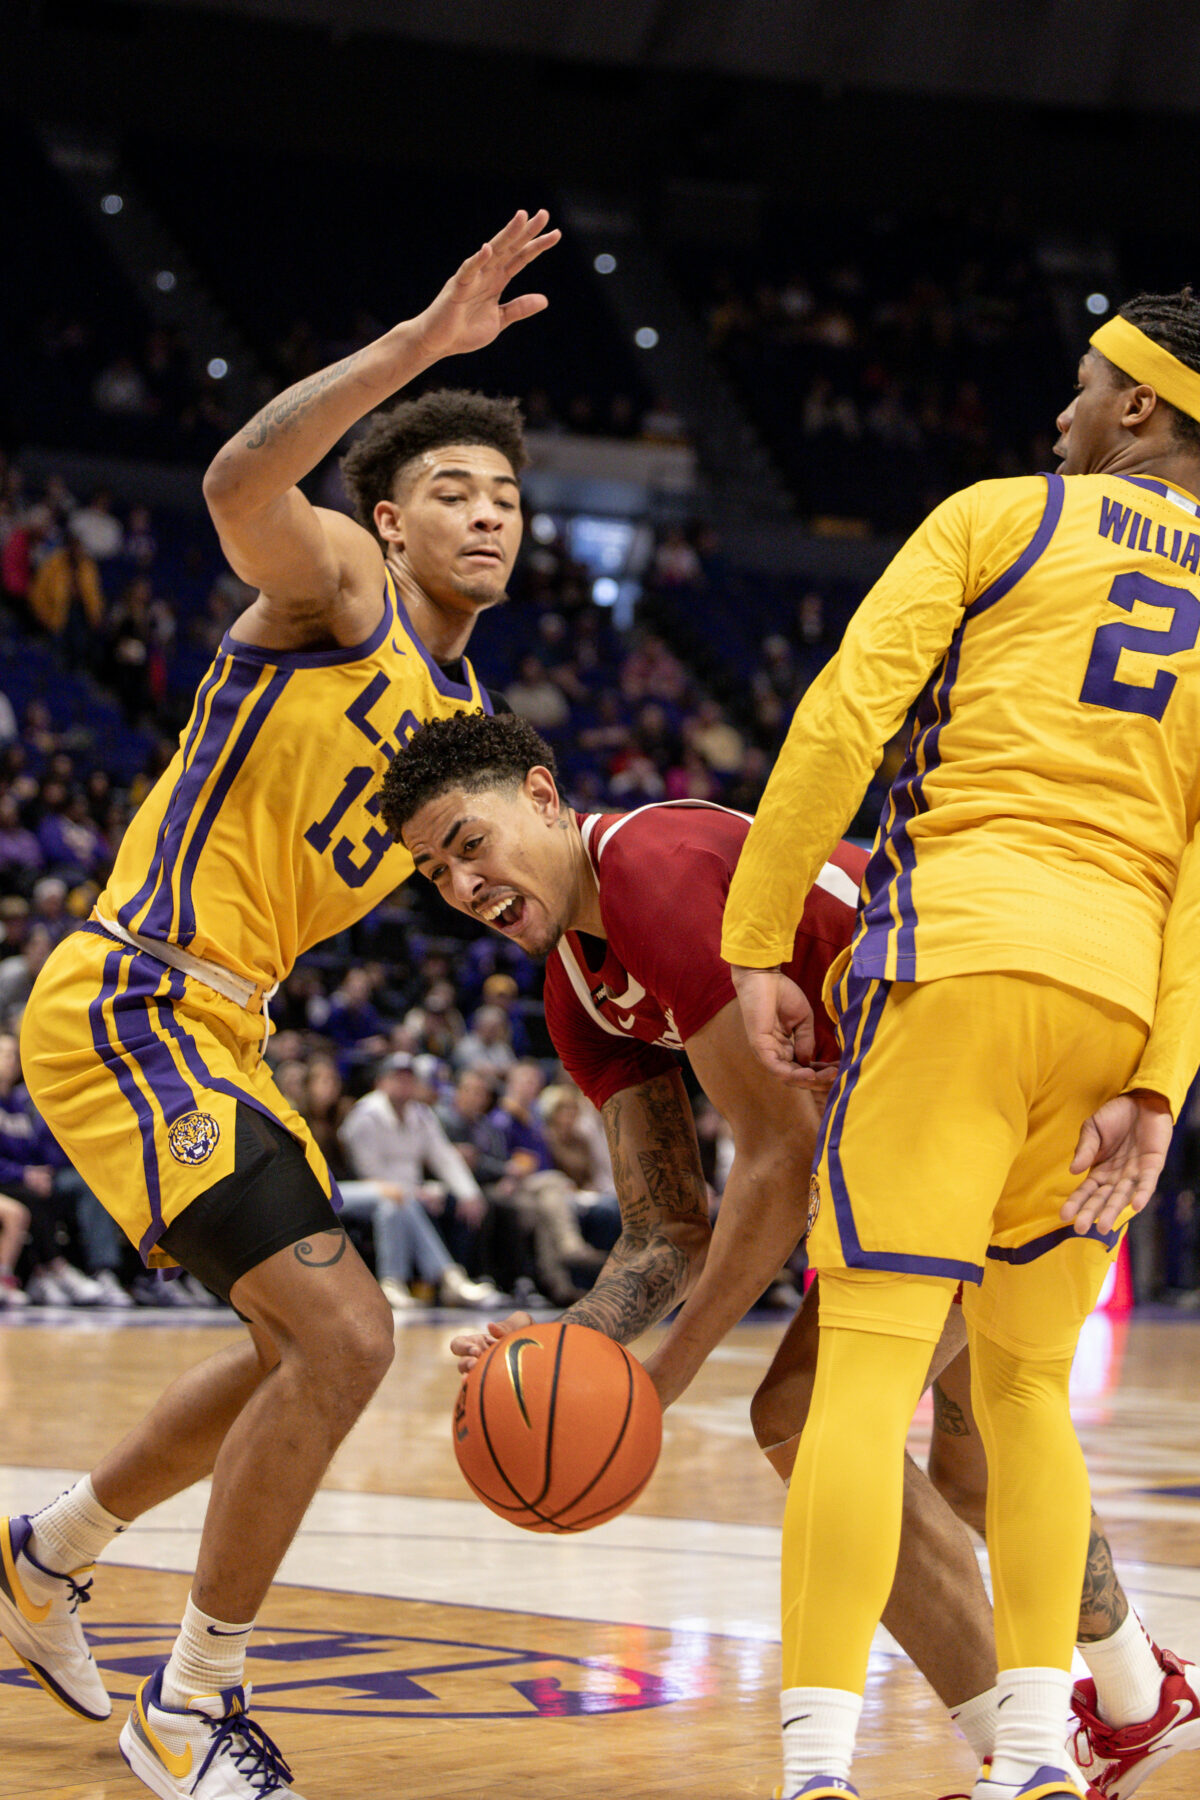 Photo gallery: Arkansas’ lack of defense leads to failure at LSU